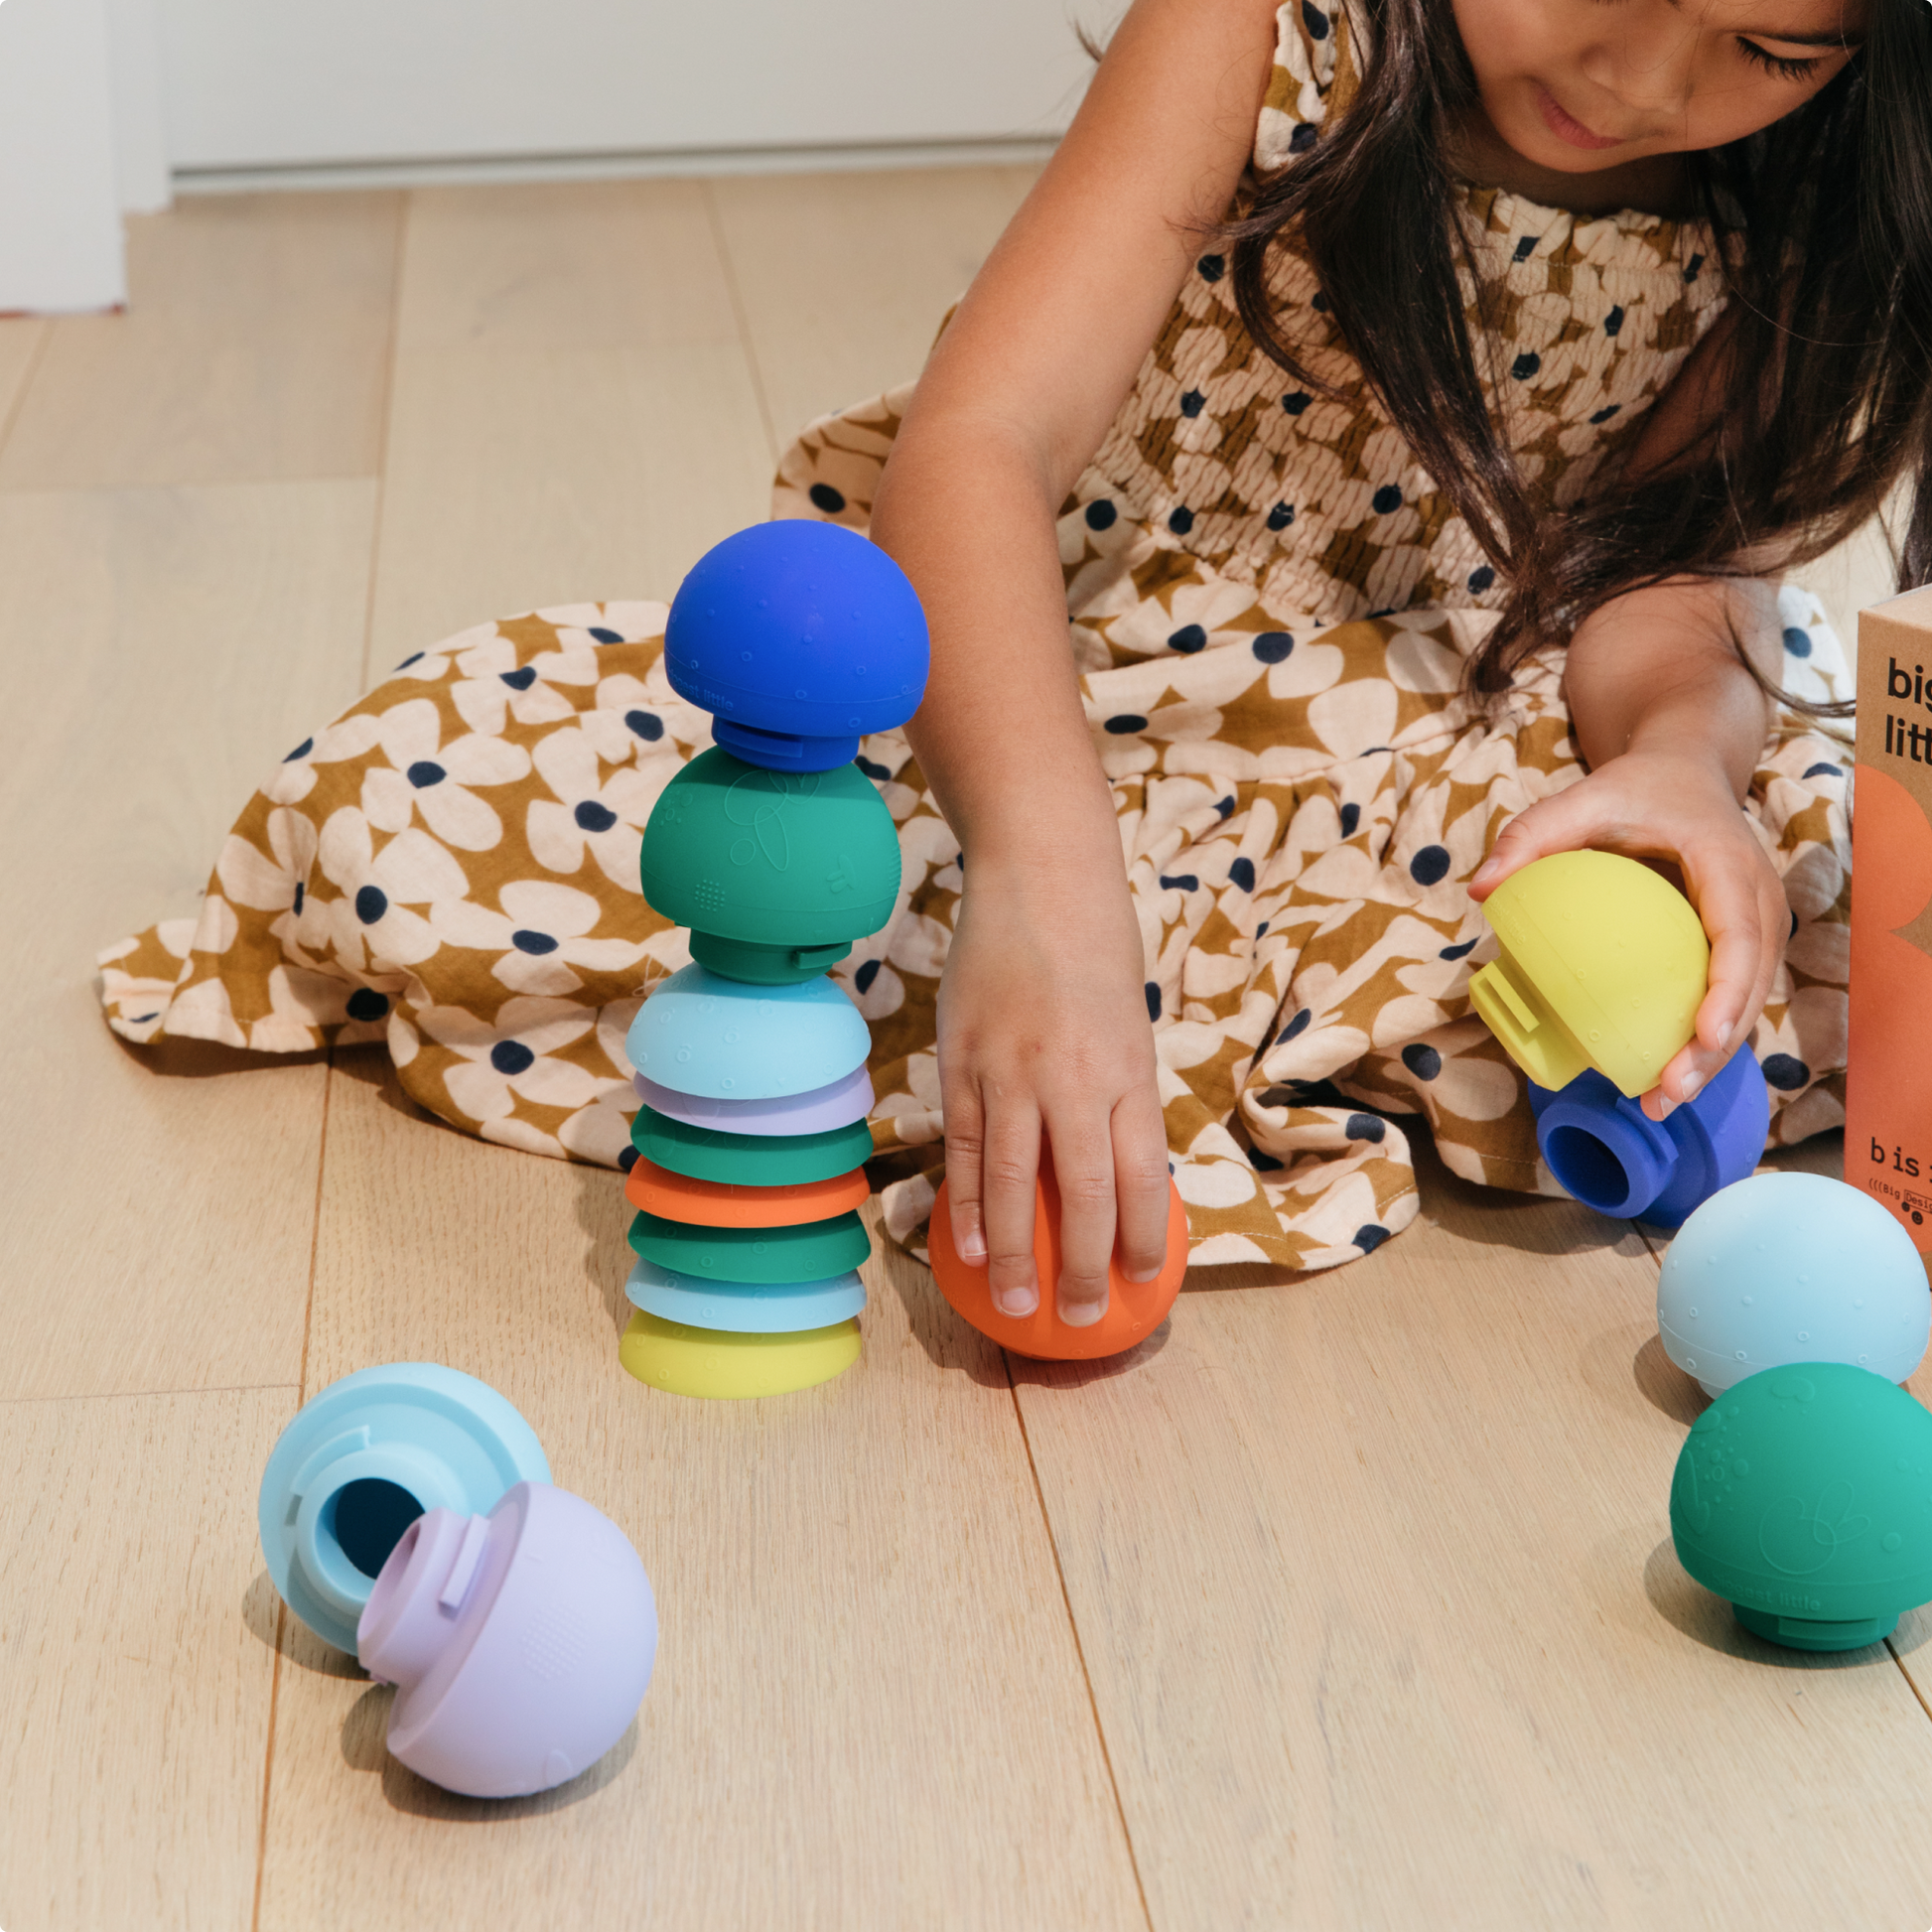 A toddler girl is stacking bright colored lids and bodies of the detachable ball toy b is for ball™